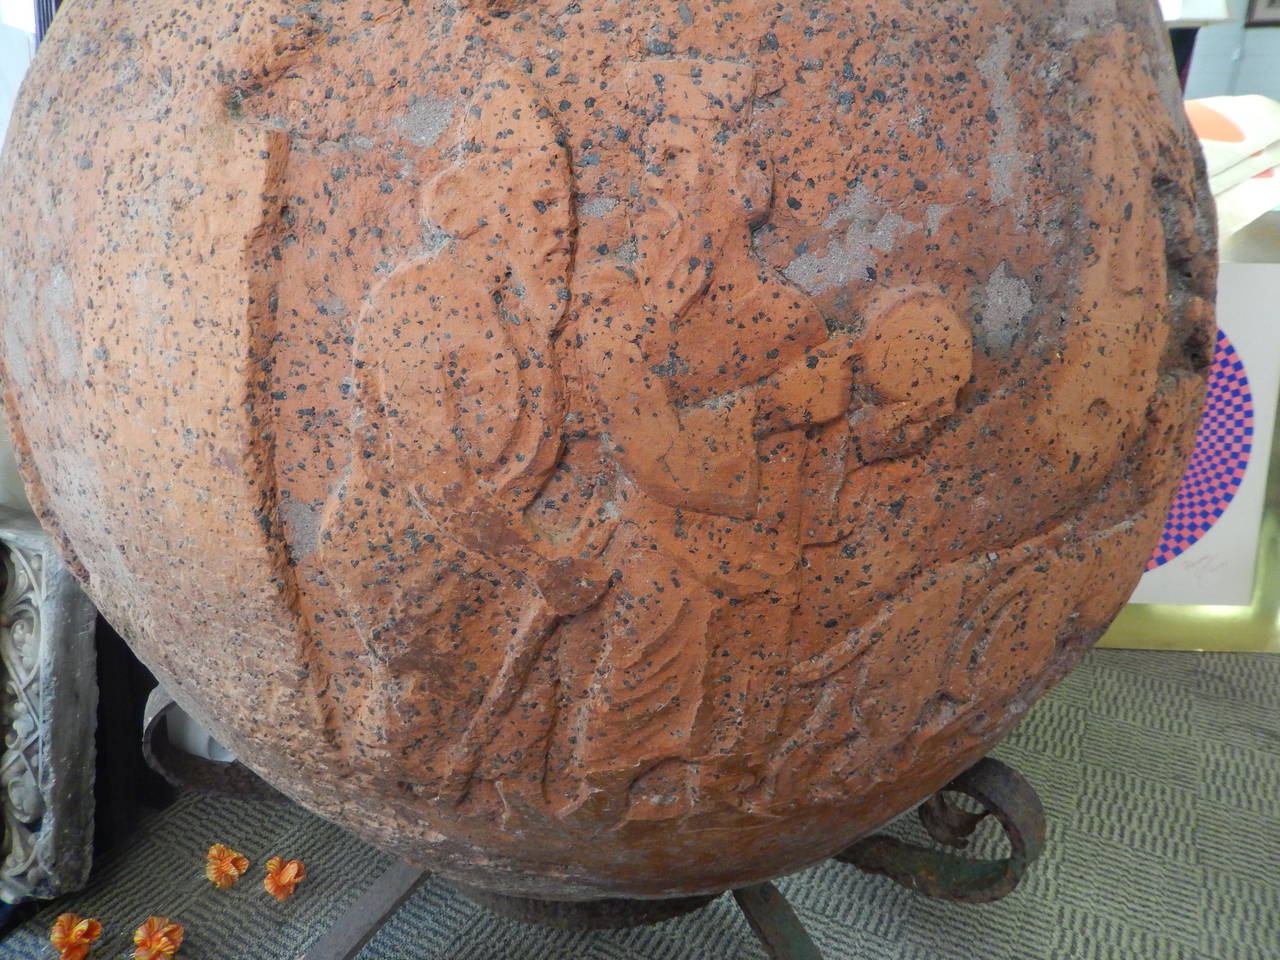 Recently de-accessioned from the Orlando History museum is this massive carved terracotta wine storage vessel, dating to approximately 250 BCE. 

Retrieved from the Eturian region of Italy, it is raised on a later period wrought iron base for